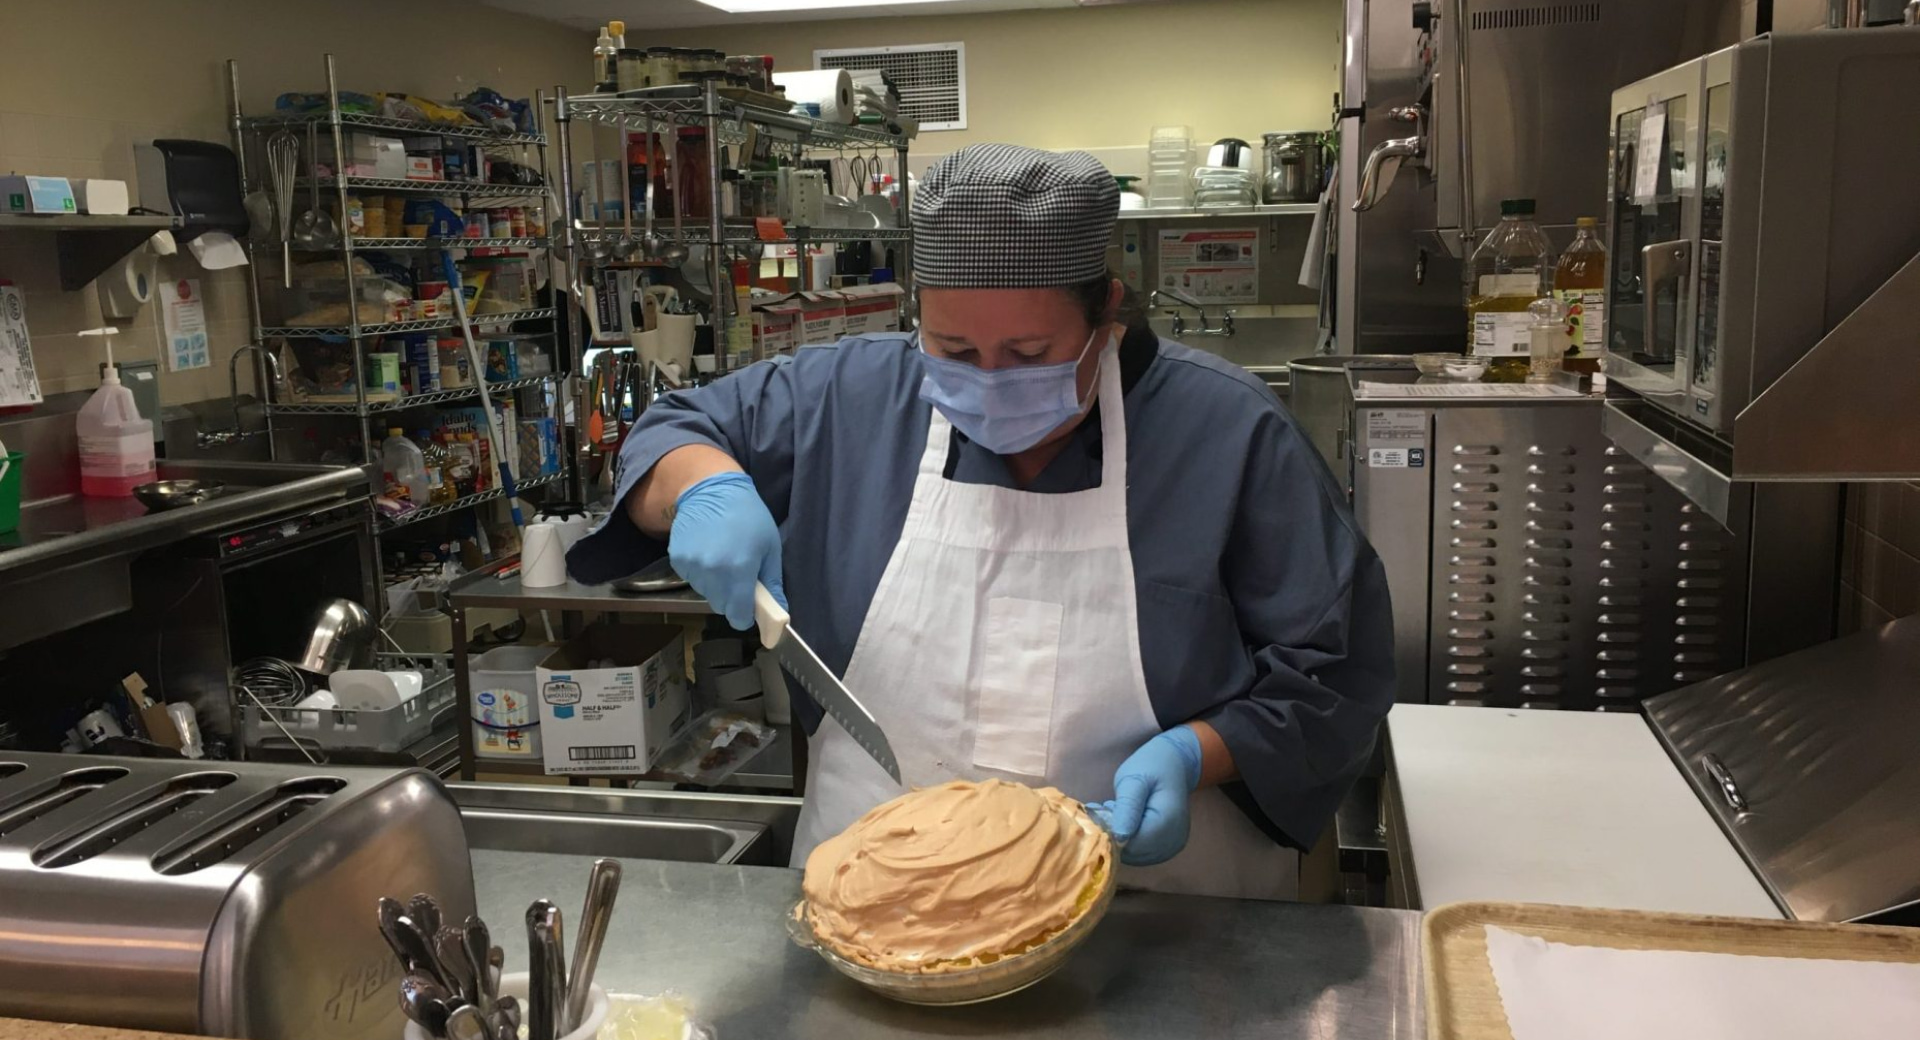 Inpatient Center Chef Serves Up Meals For Staff, Patients, and Families in Need